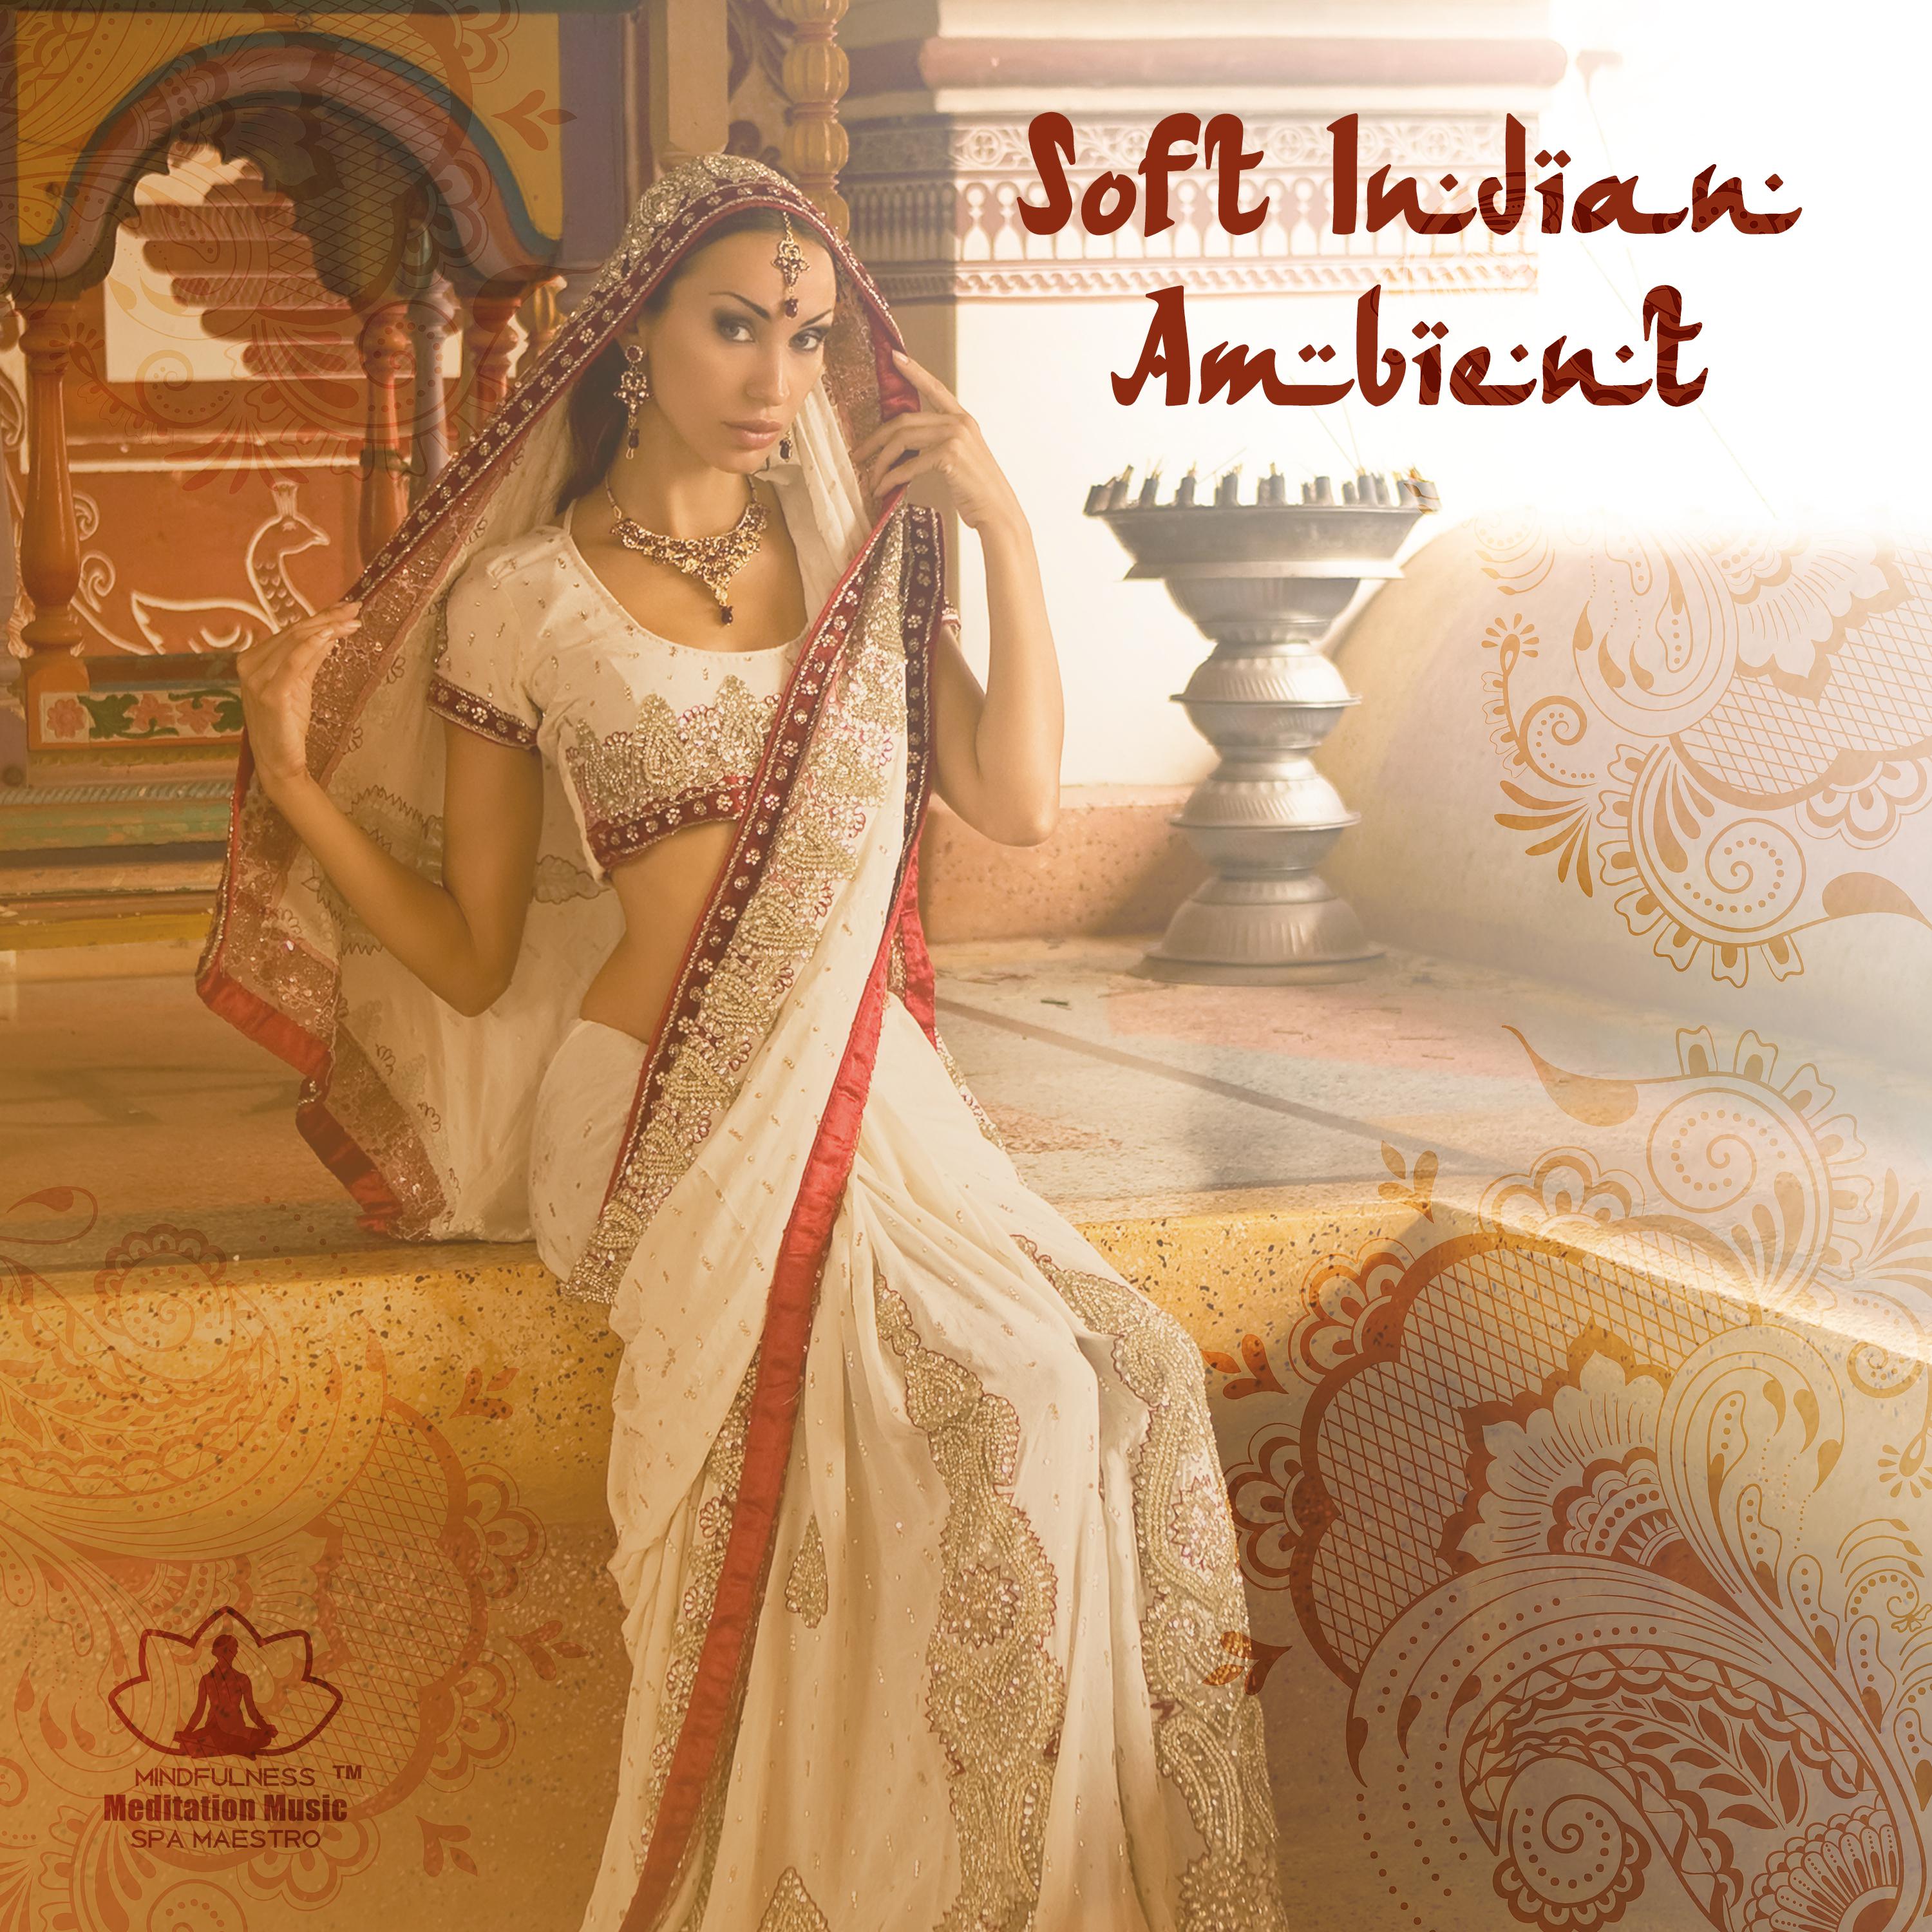 Soft Indian Ambient